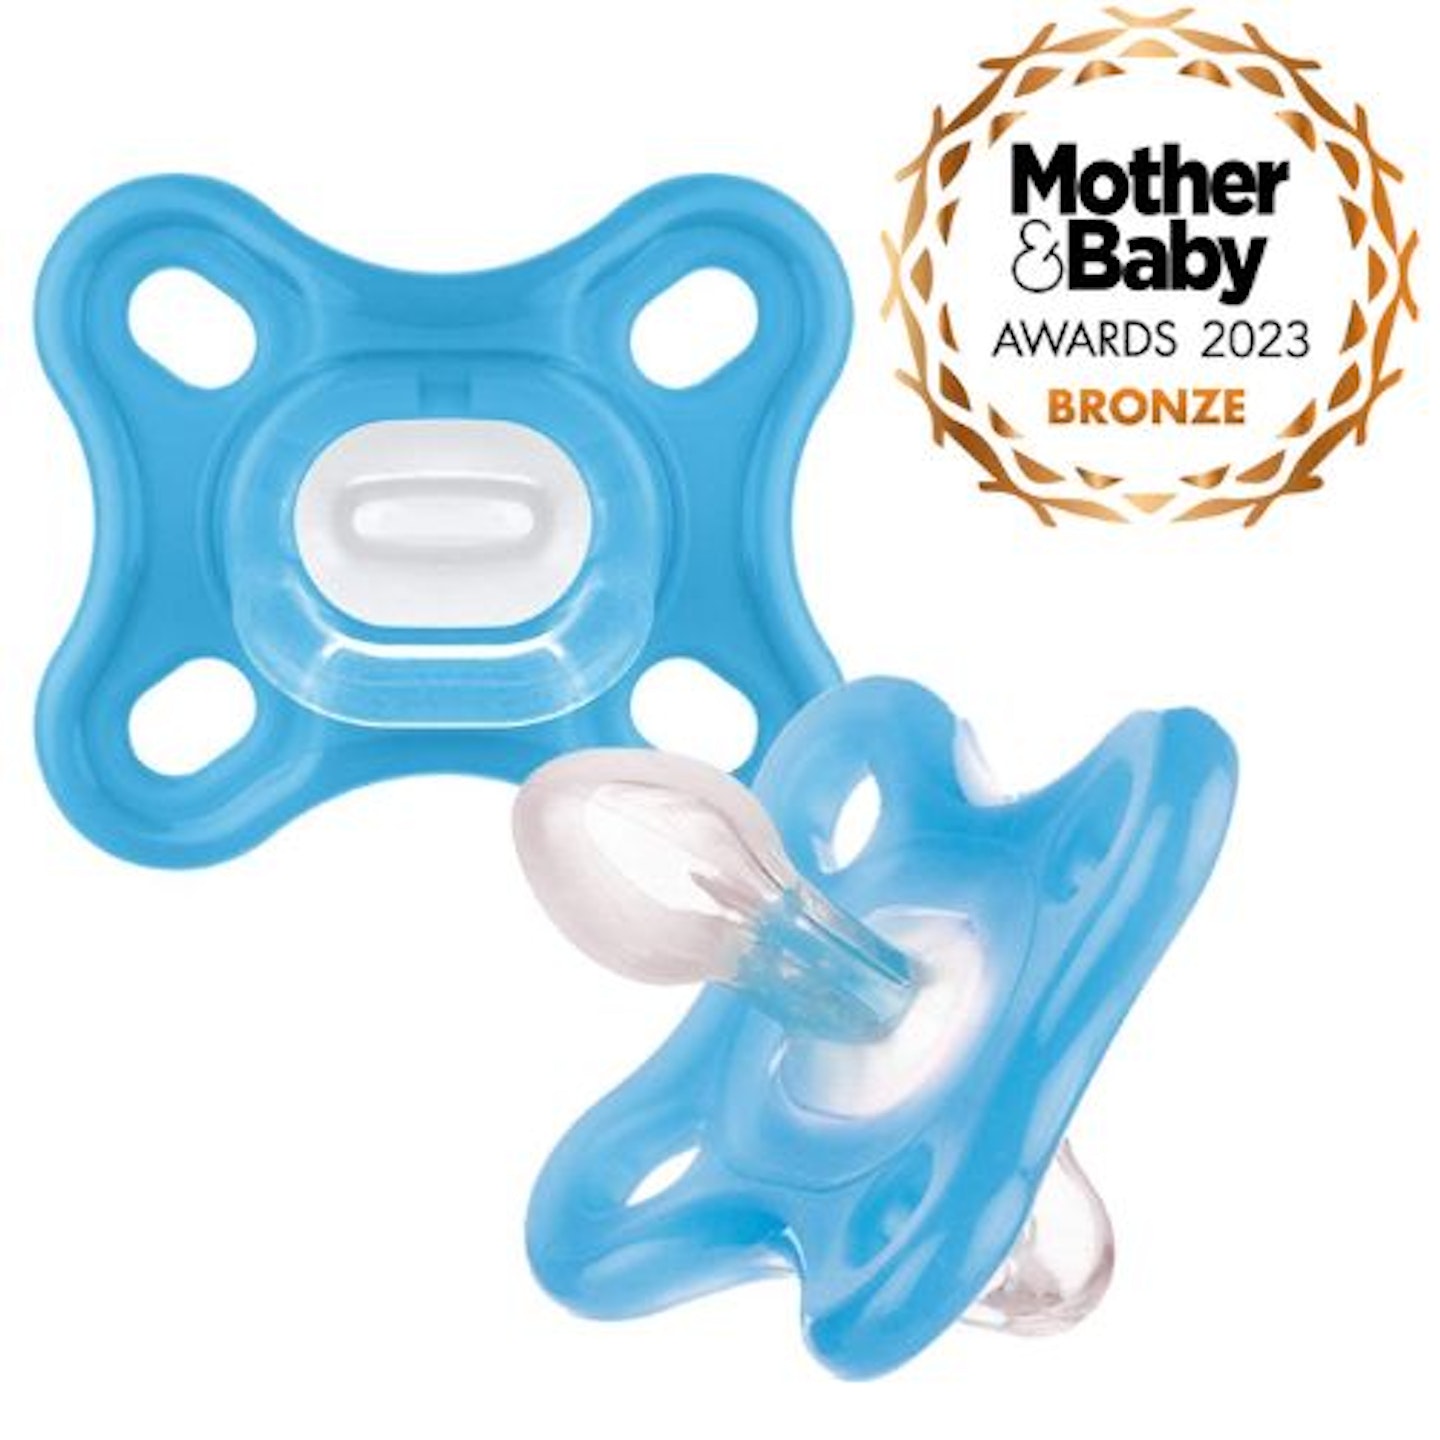 MAM Comfort All-Silicone Soothers